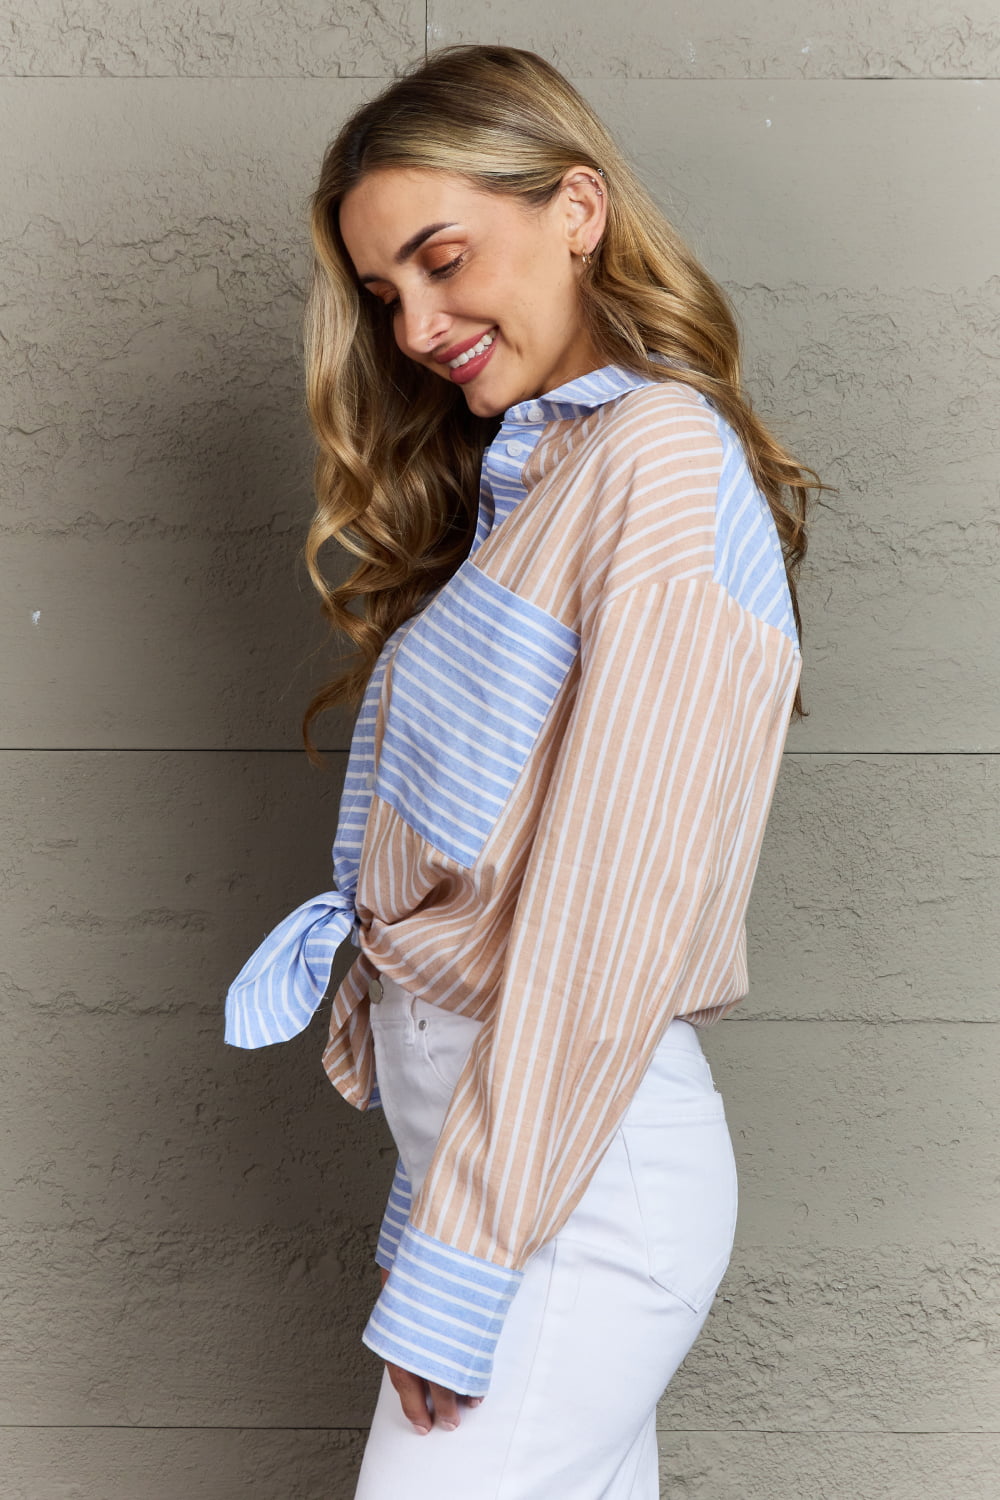 GeeGee Quirky Charms Striped Multicolored Button Down Top